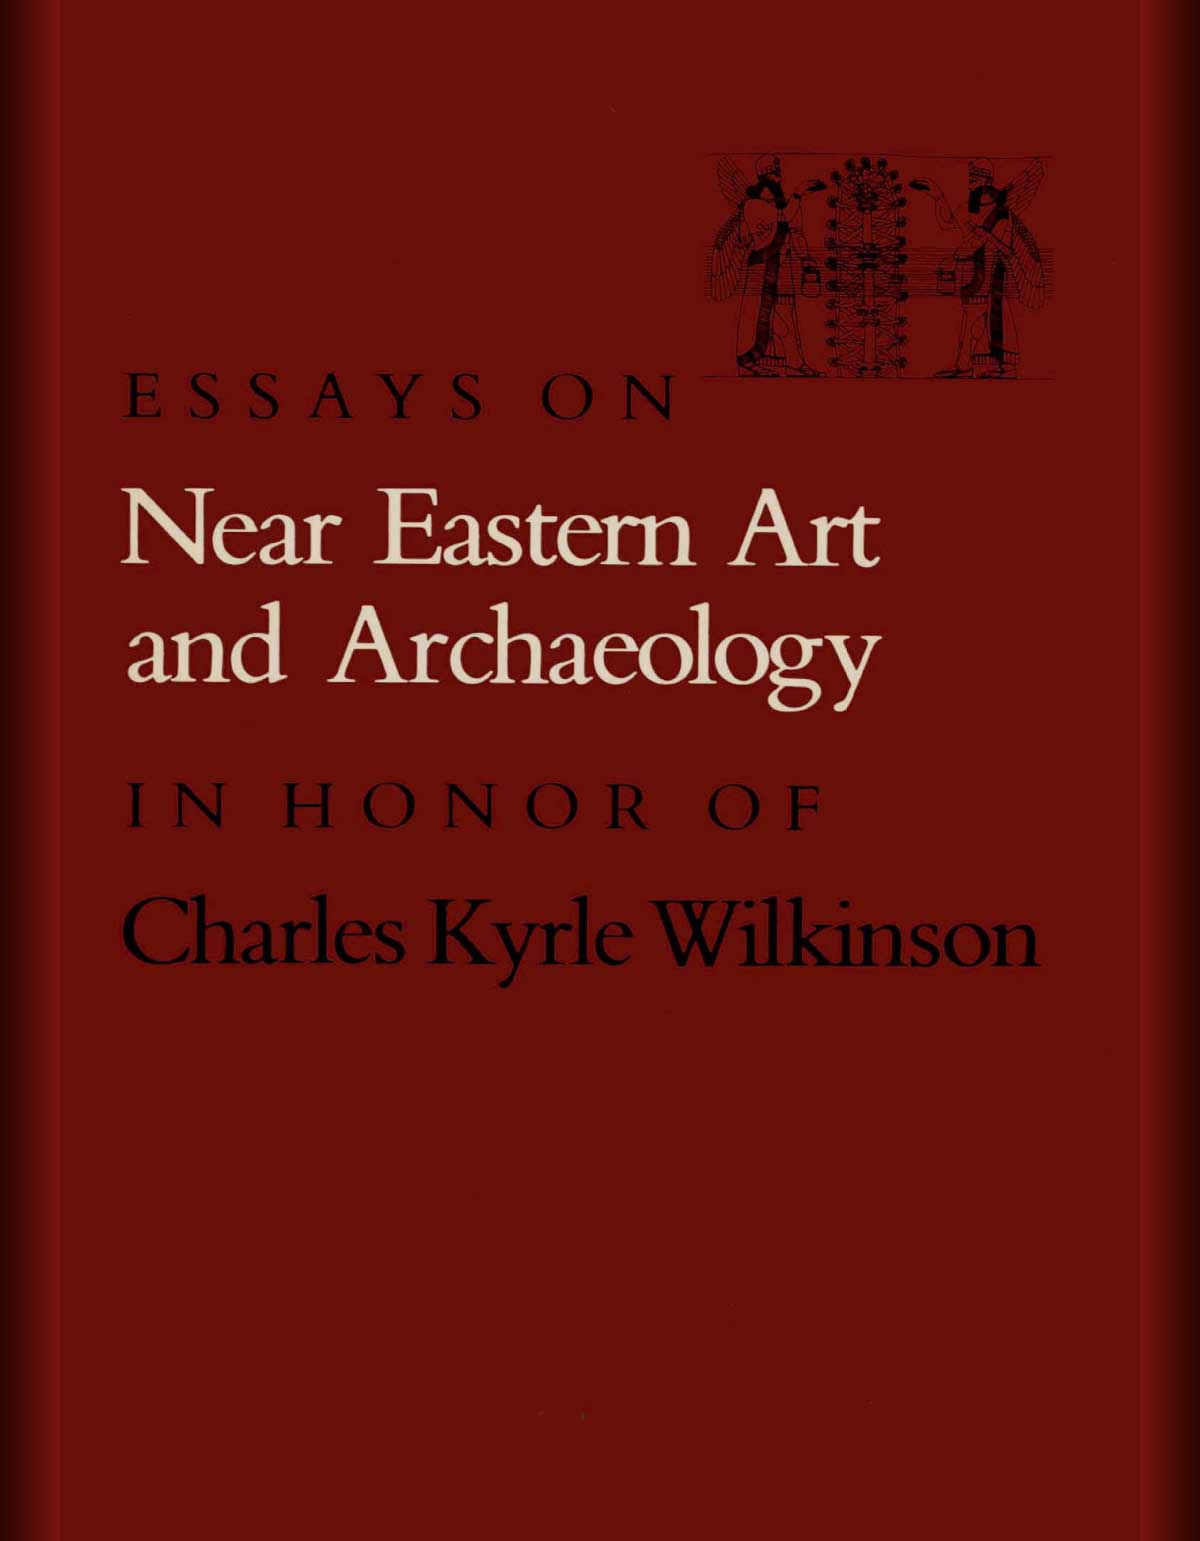 Essays_on_Near_Eastern_Art_and_Archaeology_in_Honor_of_Charles_Kyrle_Wilkinson-cover